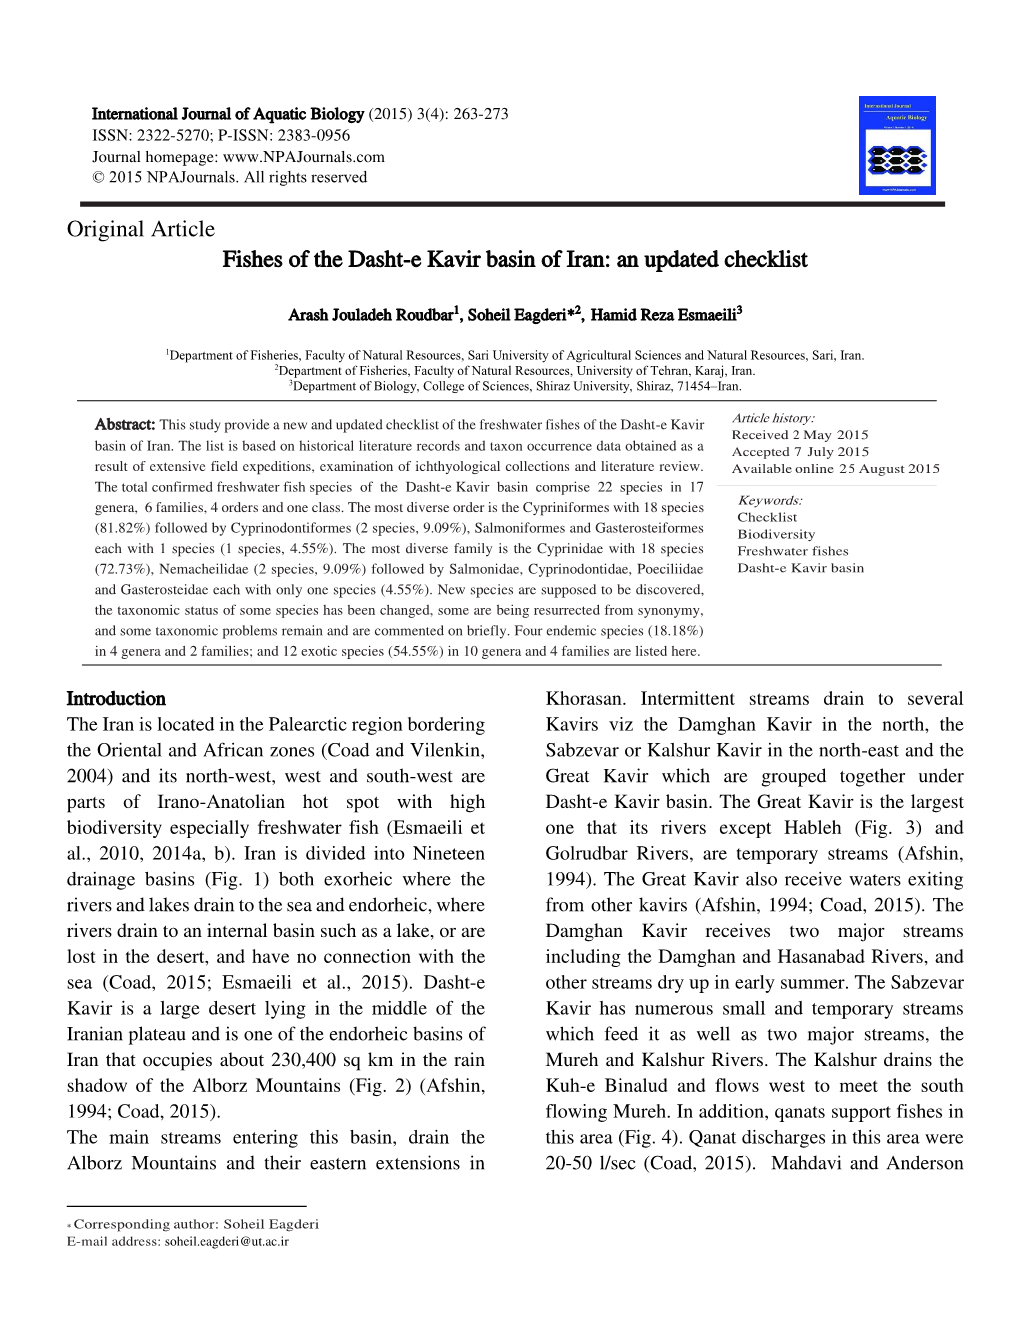 Original Article Fishes of the Dasht-E Kavir Basin of Iran: an Updated Checklist